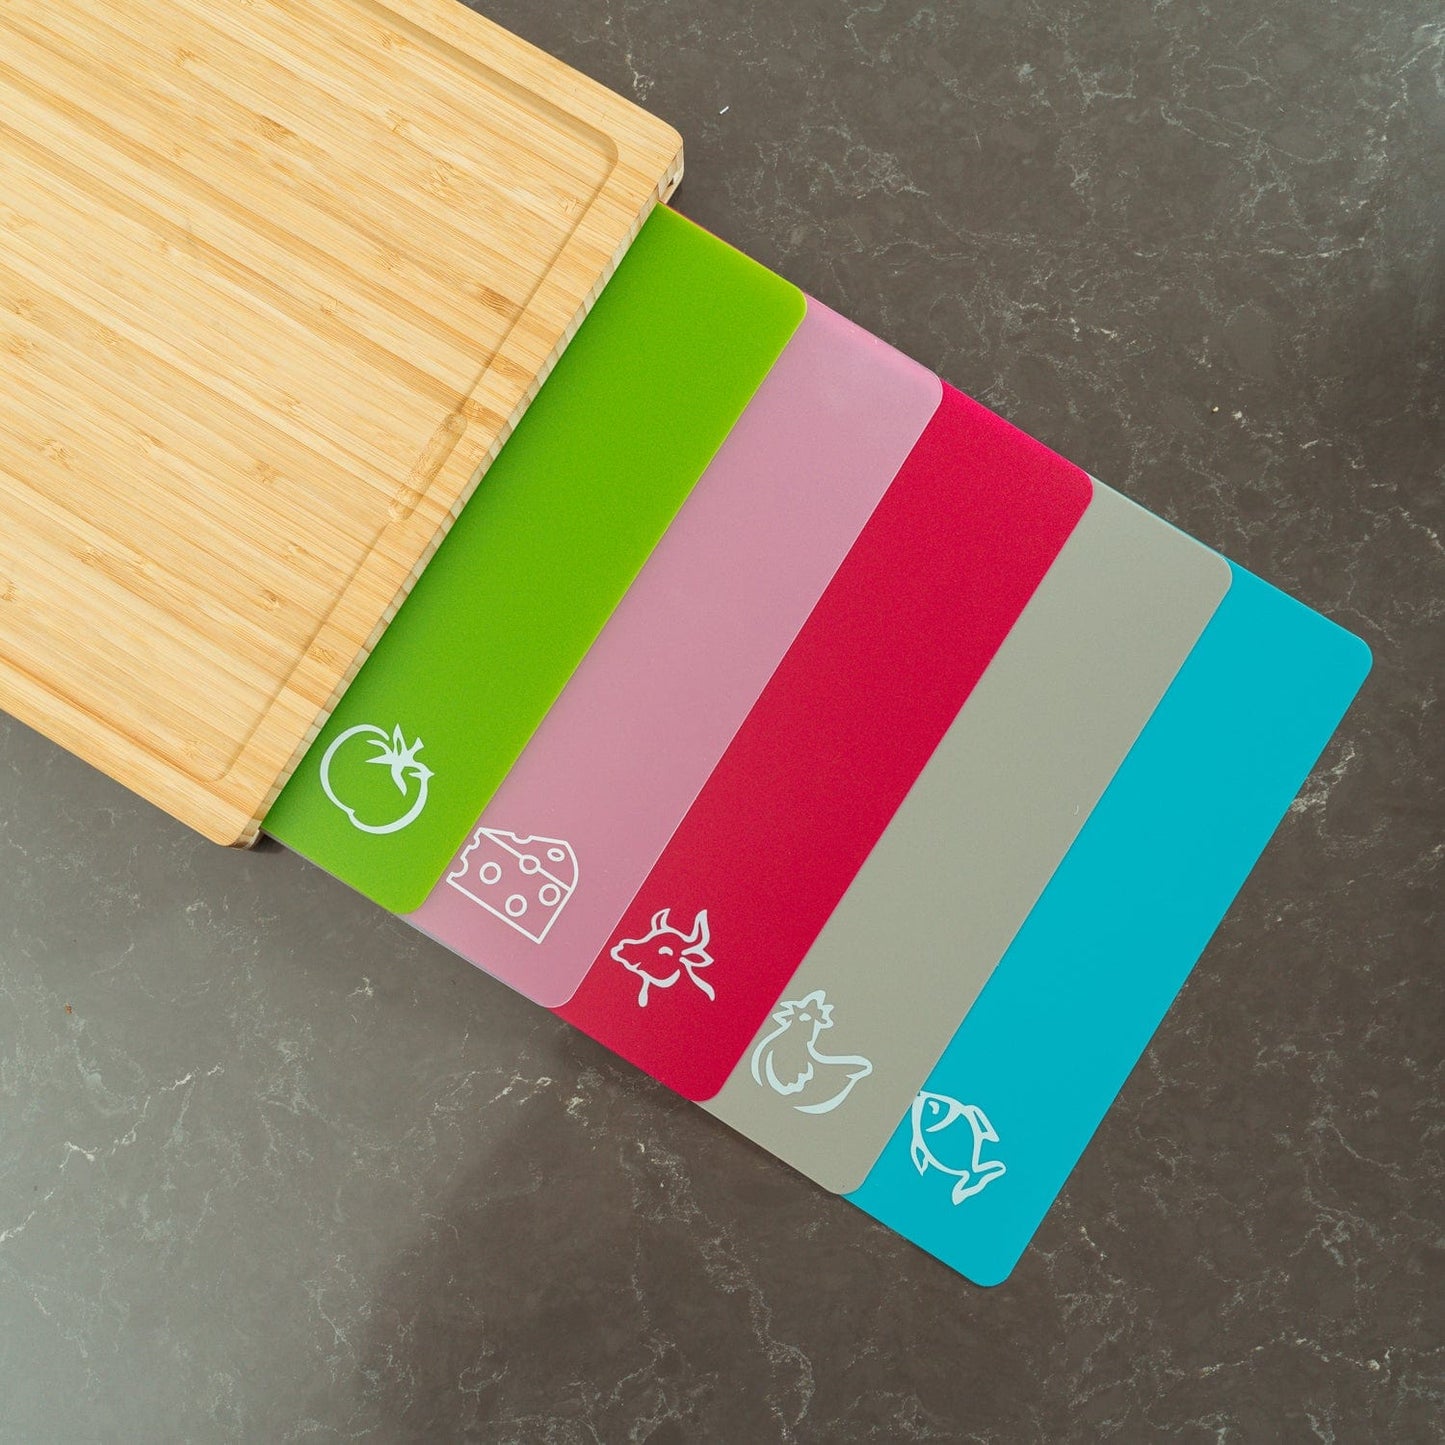 Living Today chopping board Bamboo Chopping Board with set of 5 Color-Coded Flexible Cutting Mats